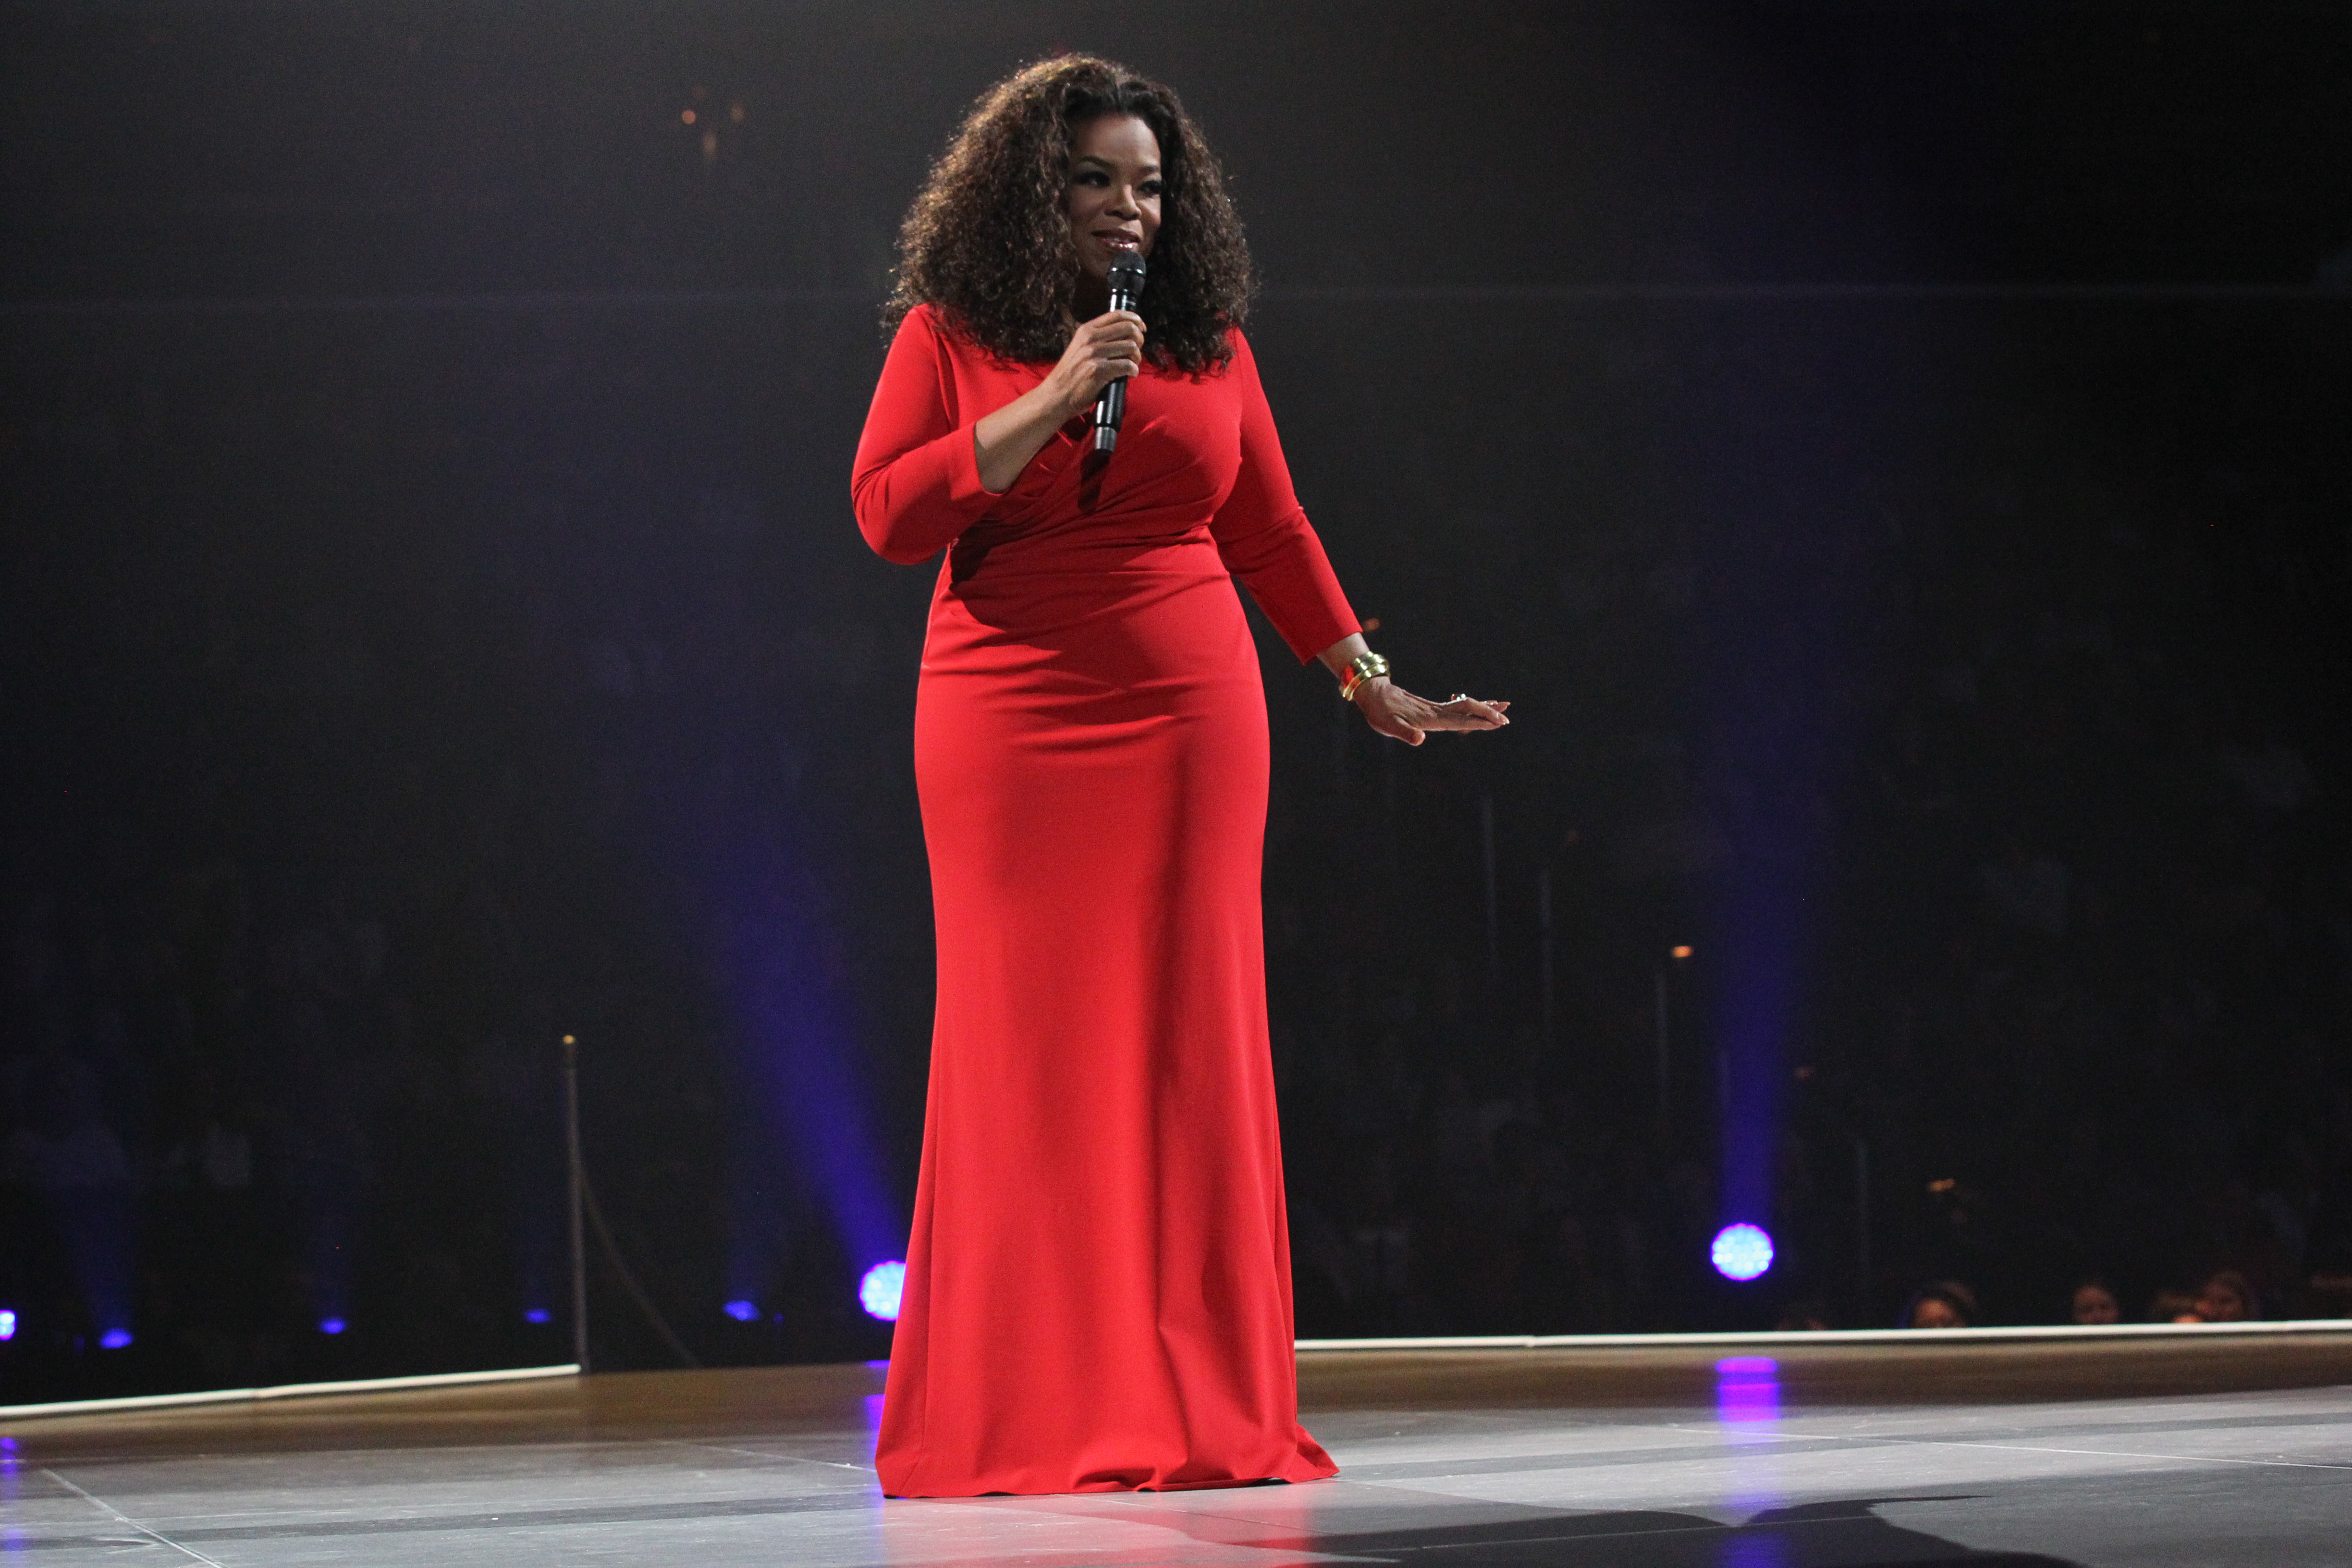 ‘Tweet-Tweets’ and Quotables from Oprah | Life You Want Tour